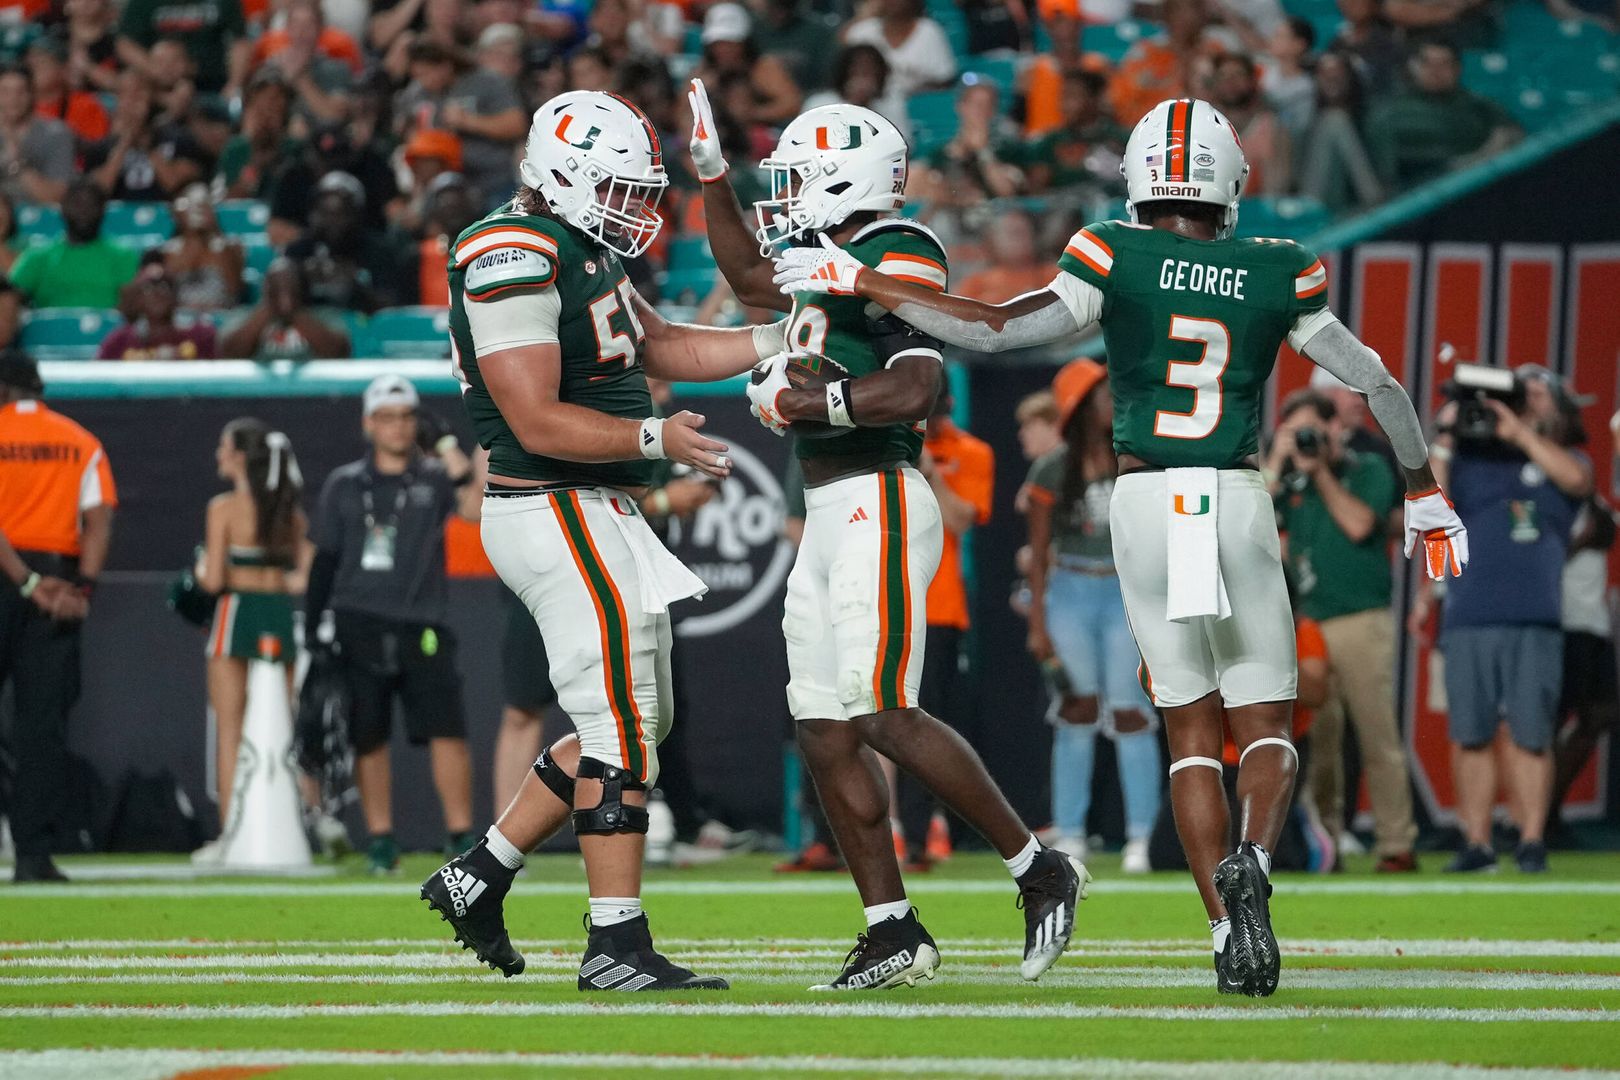 Canes Rewind: A Look Back at the Win over Bethune-Cookman